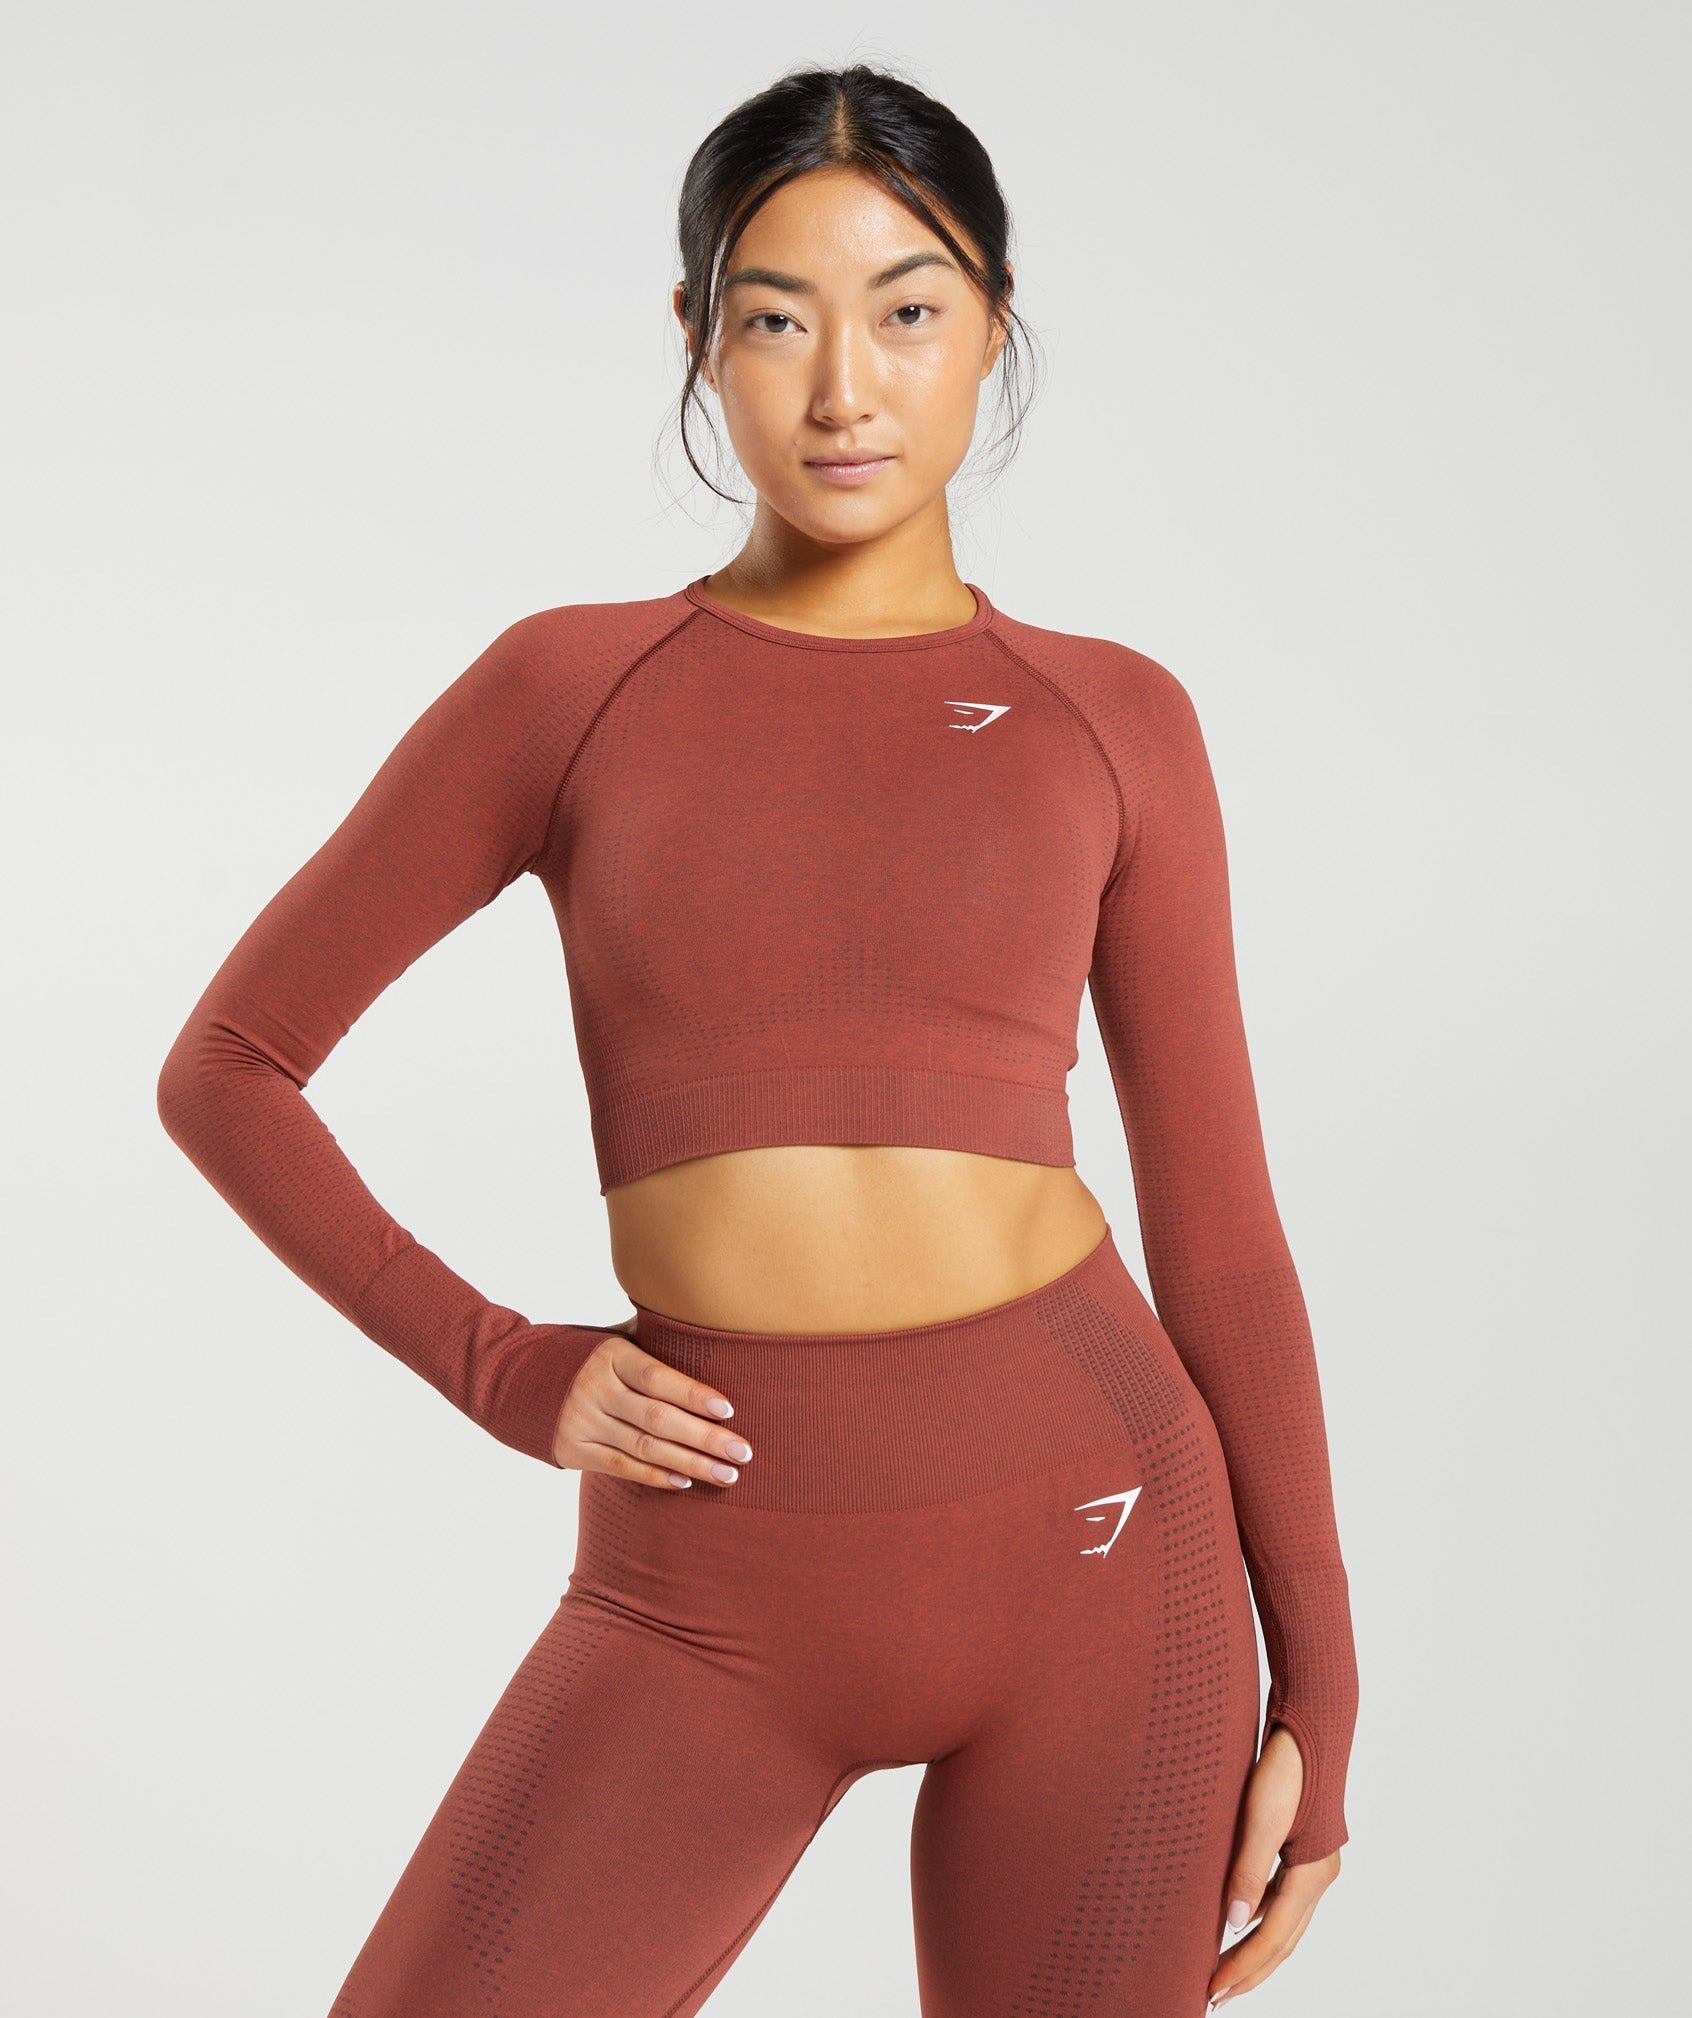 Gymshark Adapt Fleck Seamless Long Sleeve Crop Top in Mineral Black Size  SMALL